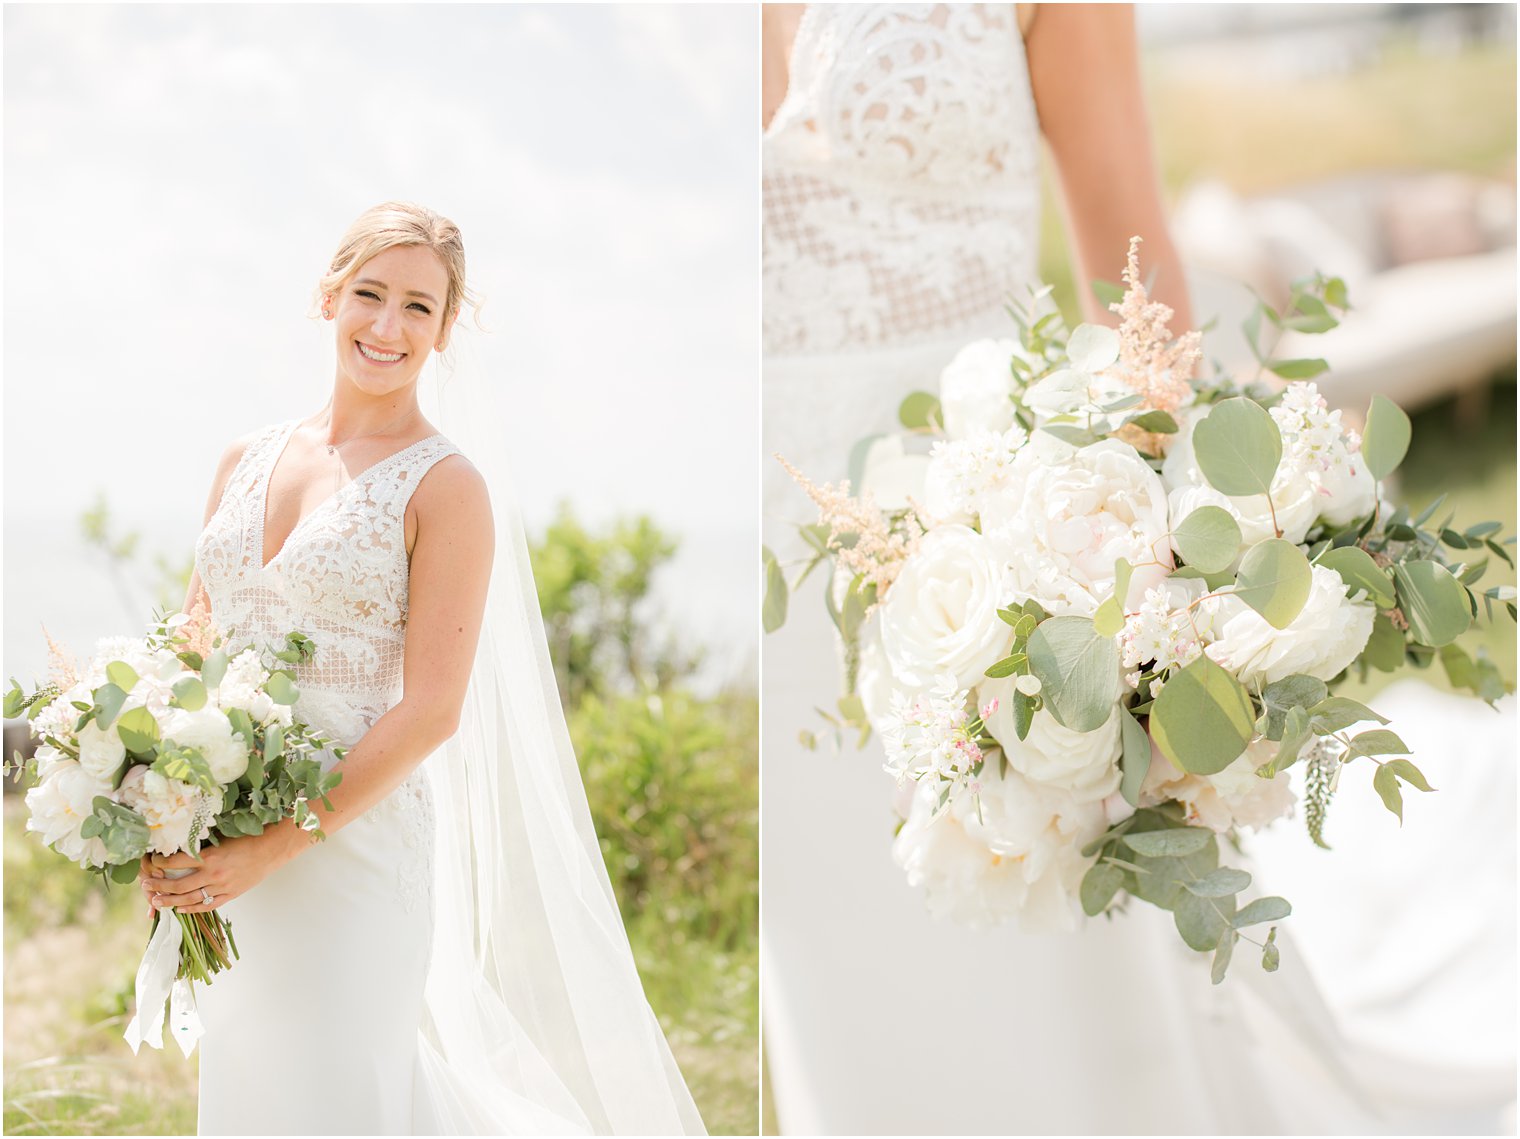 Faye and Renee's summer bridal bouquet photographed by Idalia Photography